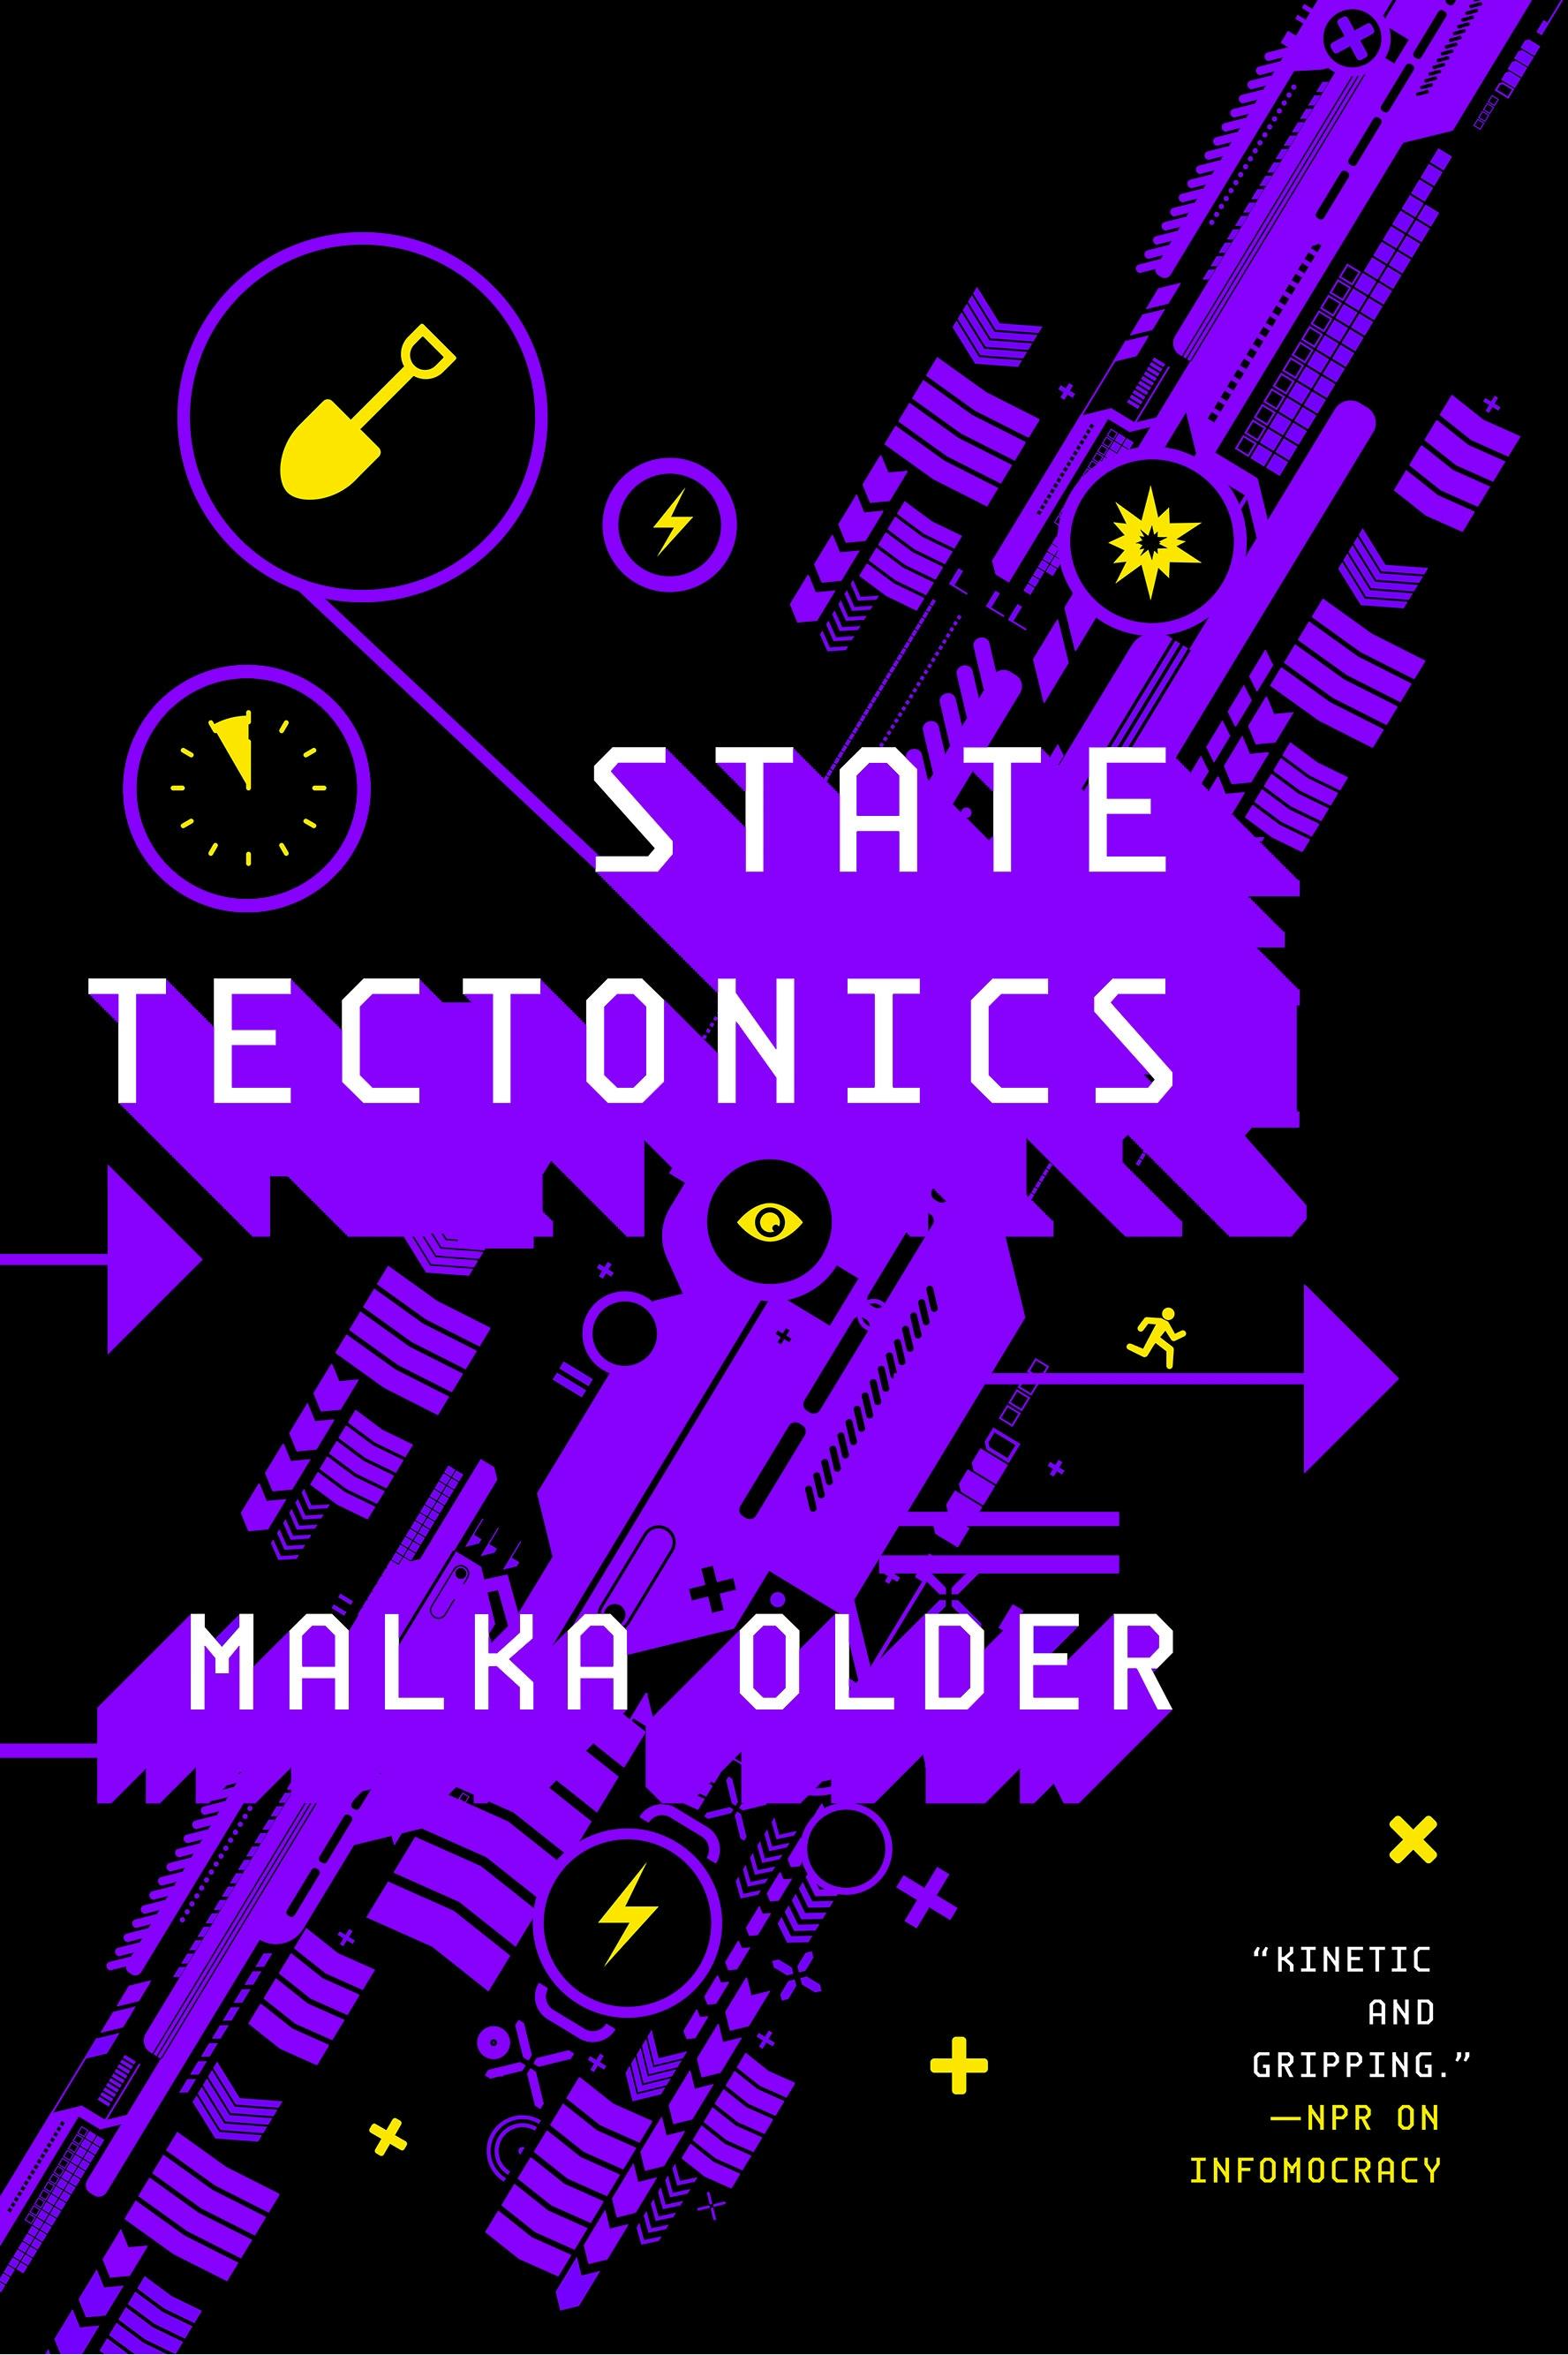 Cover for the book titled as: State Tectonics